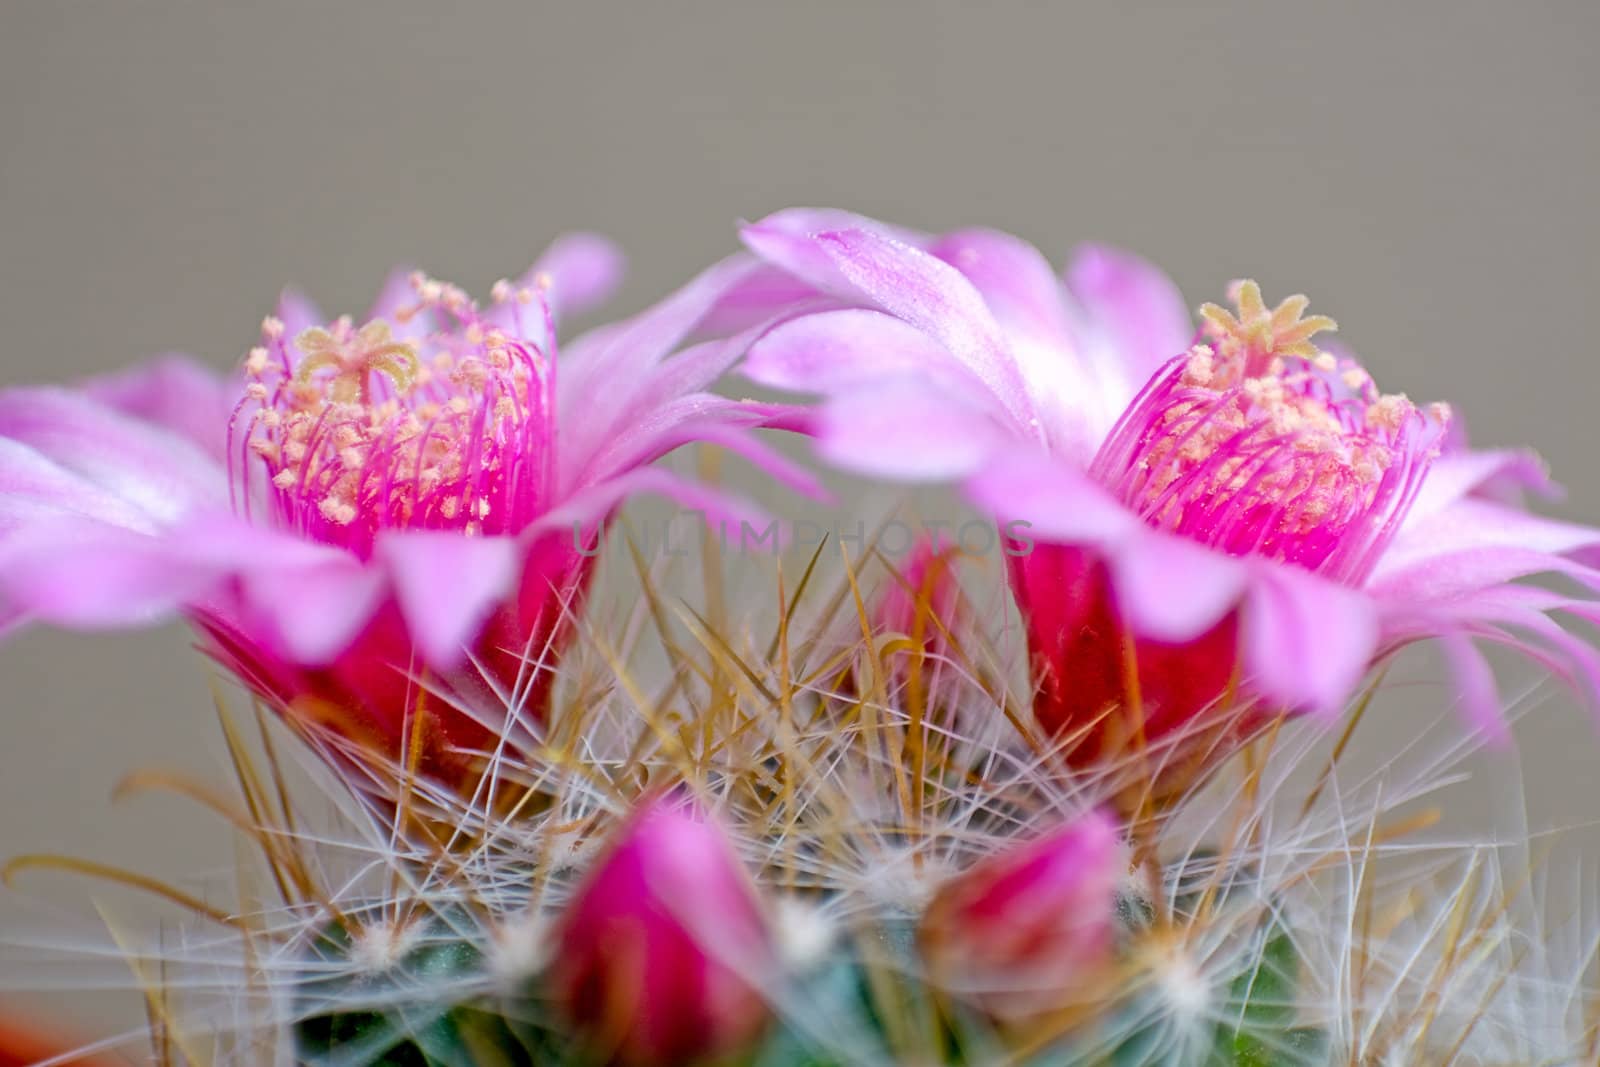 Cactus flowers by two large pink flowers.